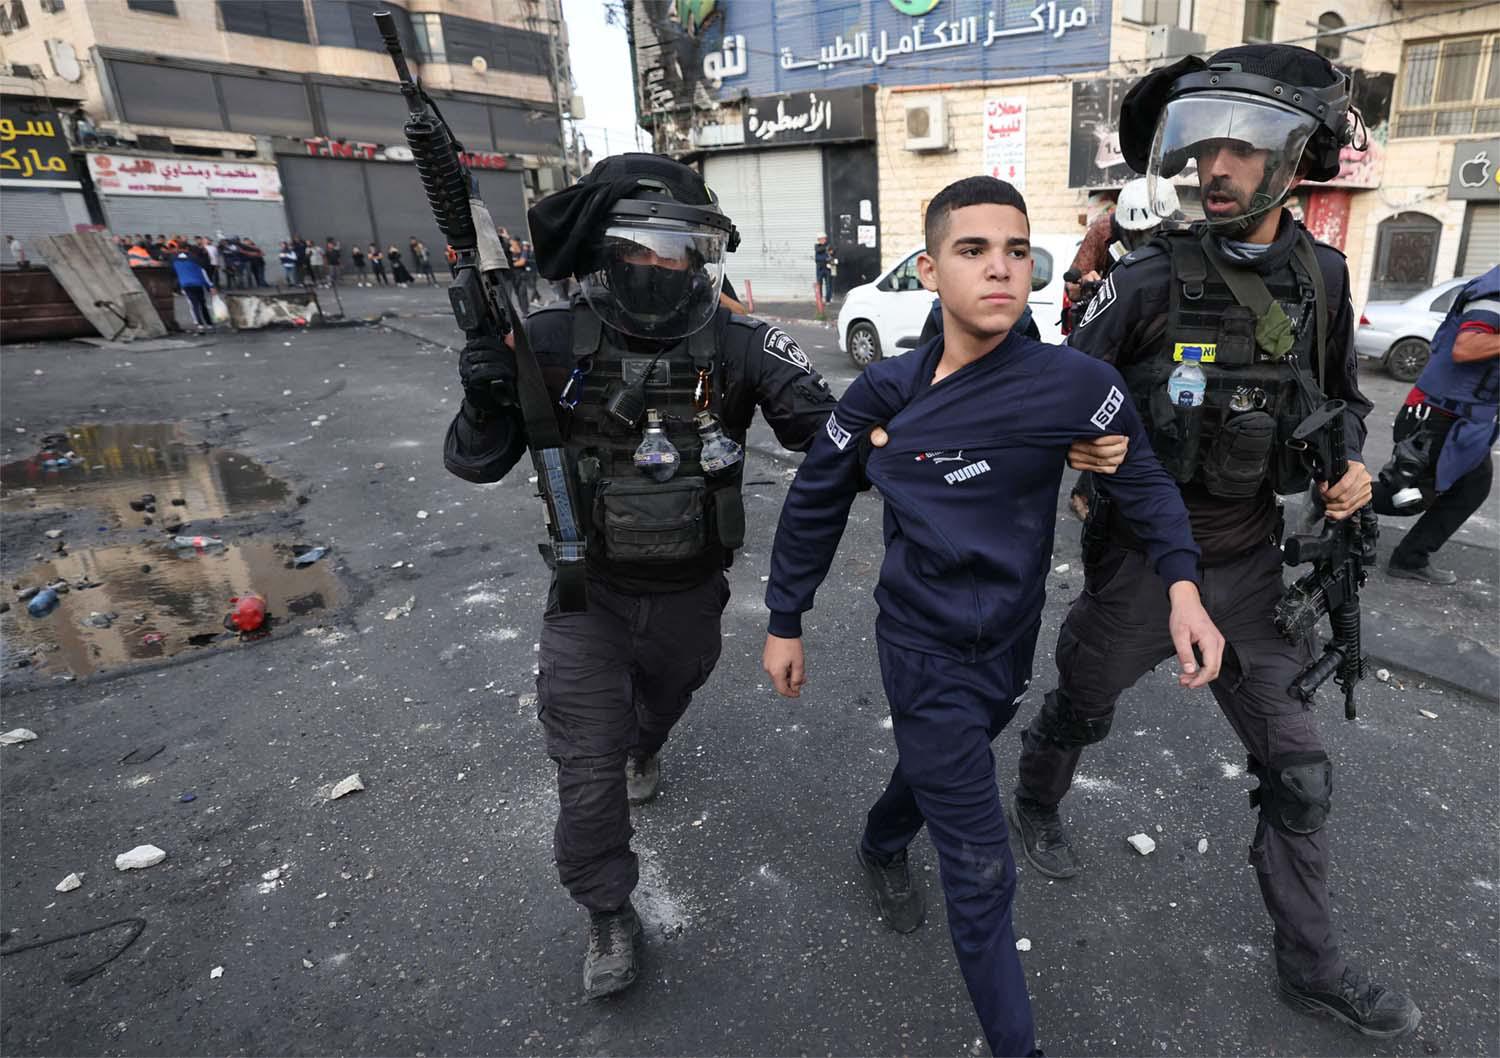 Israeli soldiers in confrontation with Palestinian protesters at the refugee camp